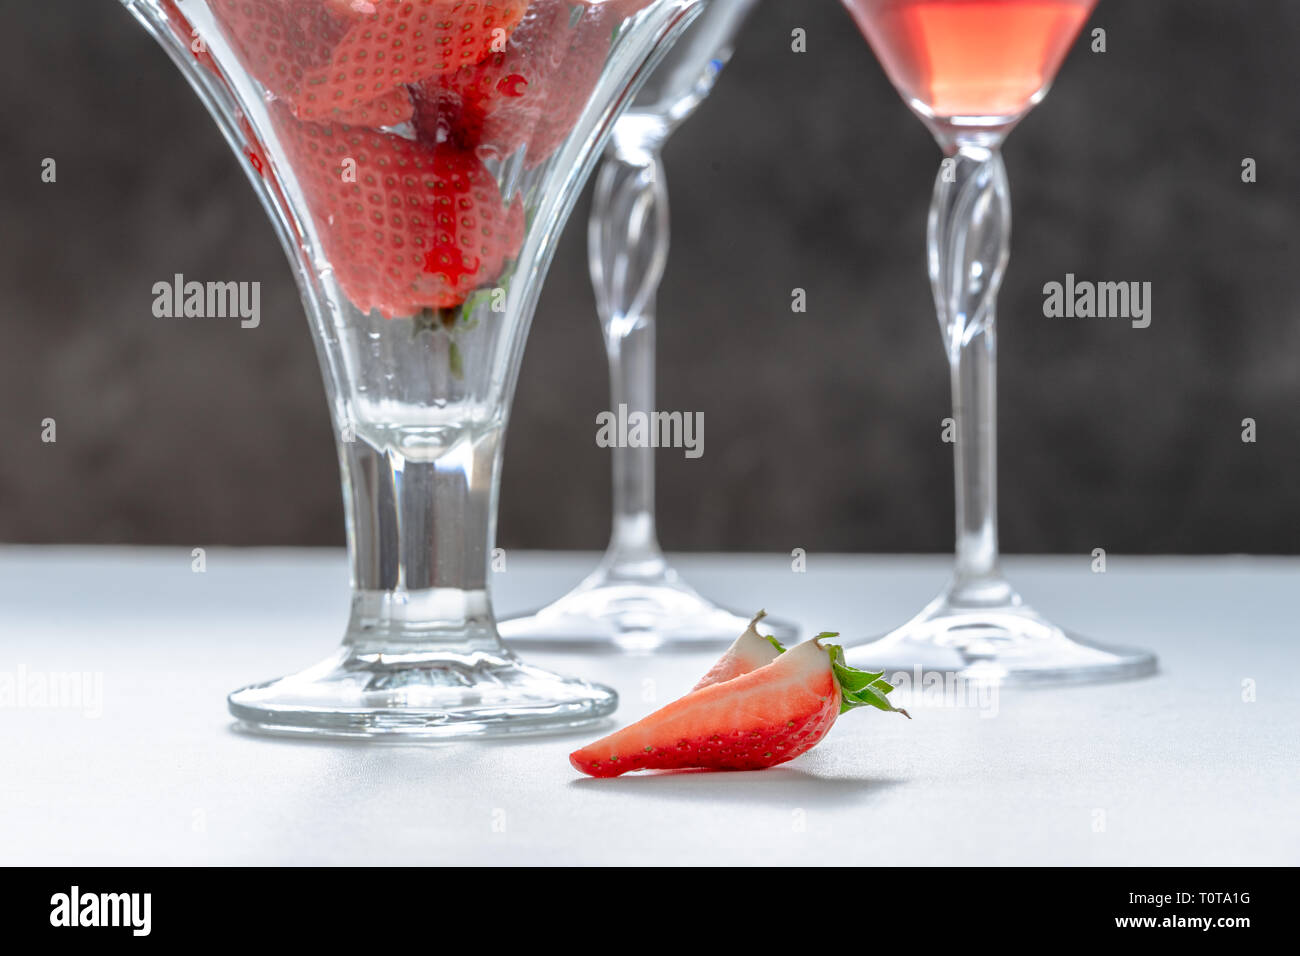 Two slices of strawberries on the table, glass with strawberries and a couple of glasses with drink Stock Photo